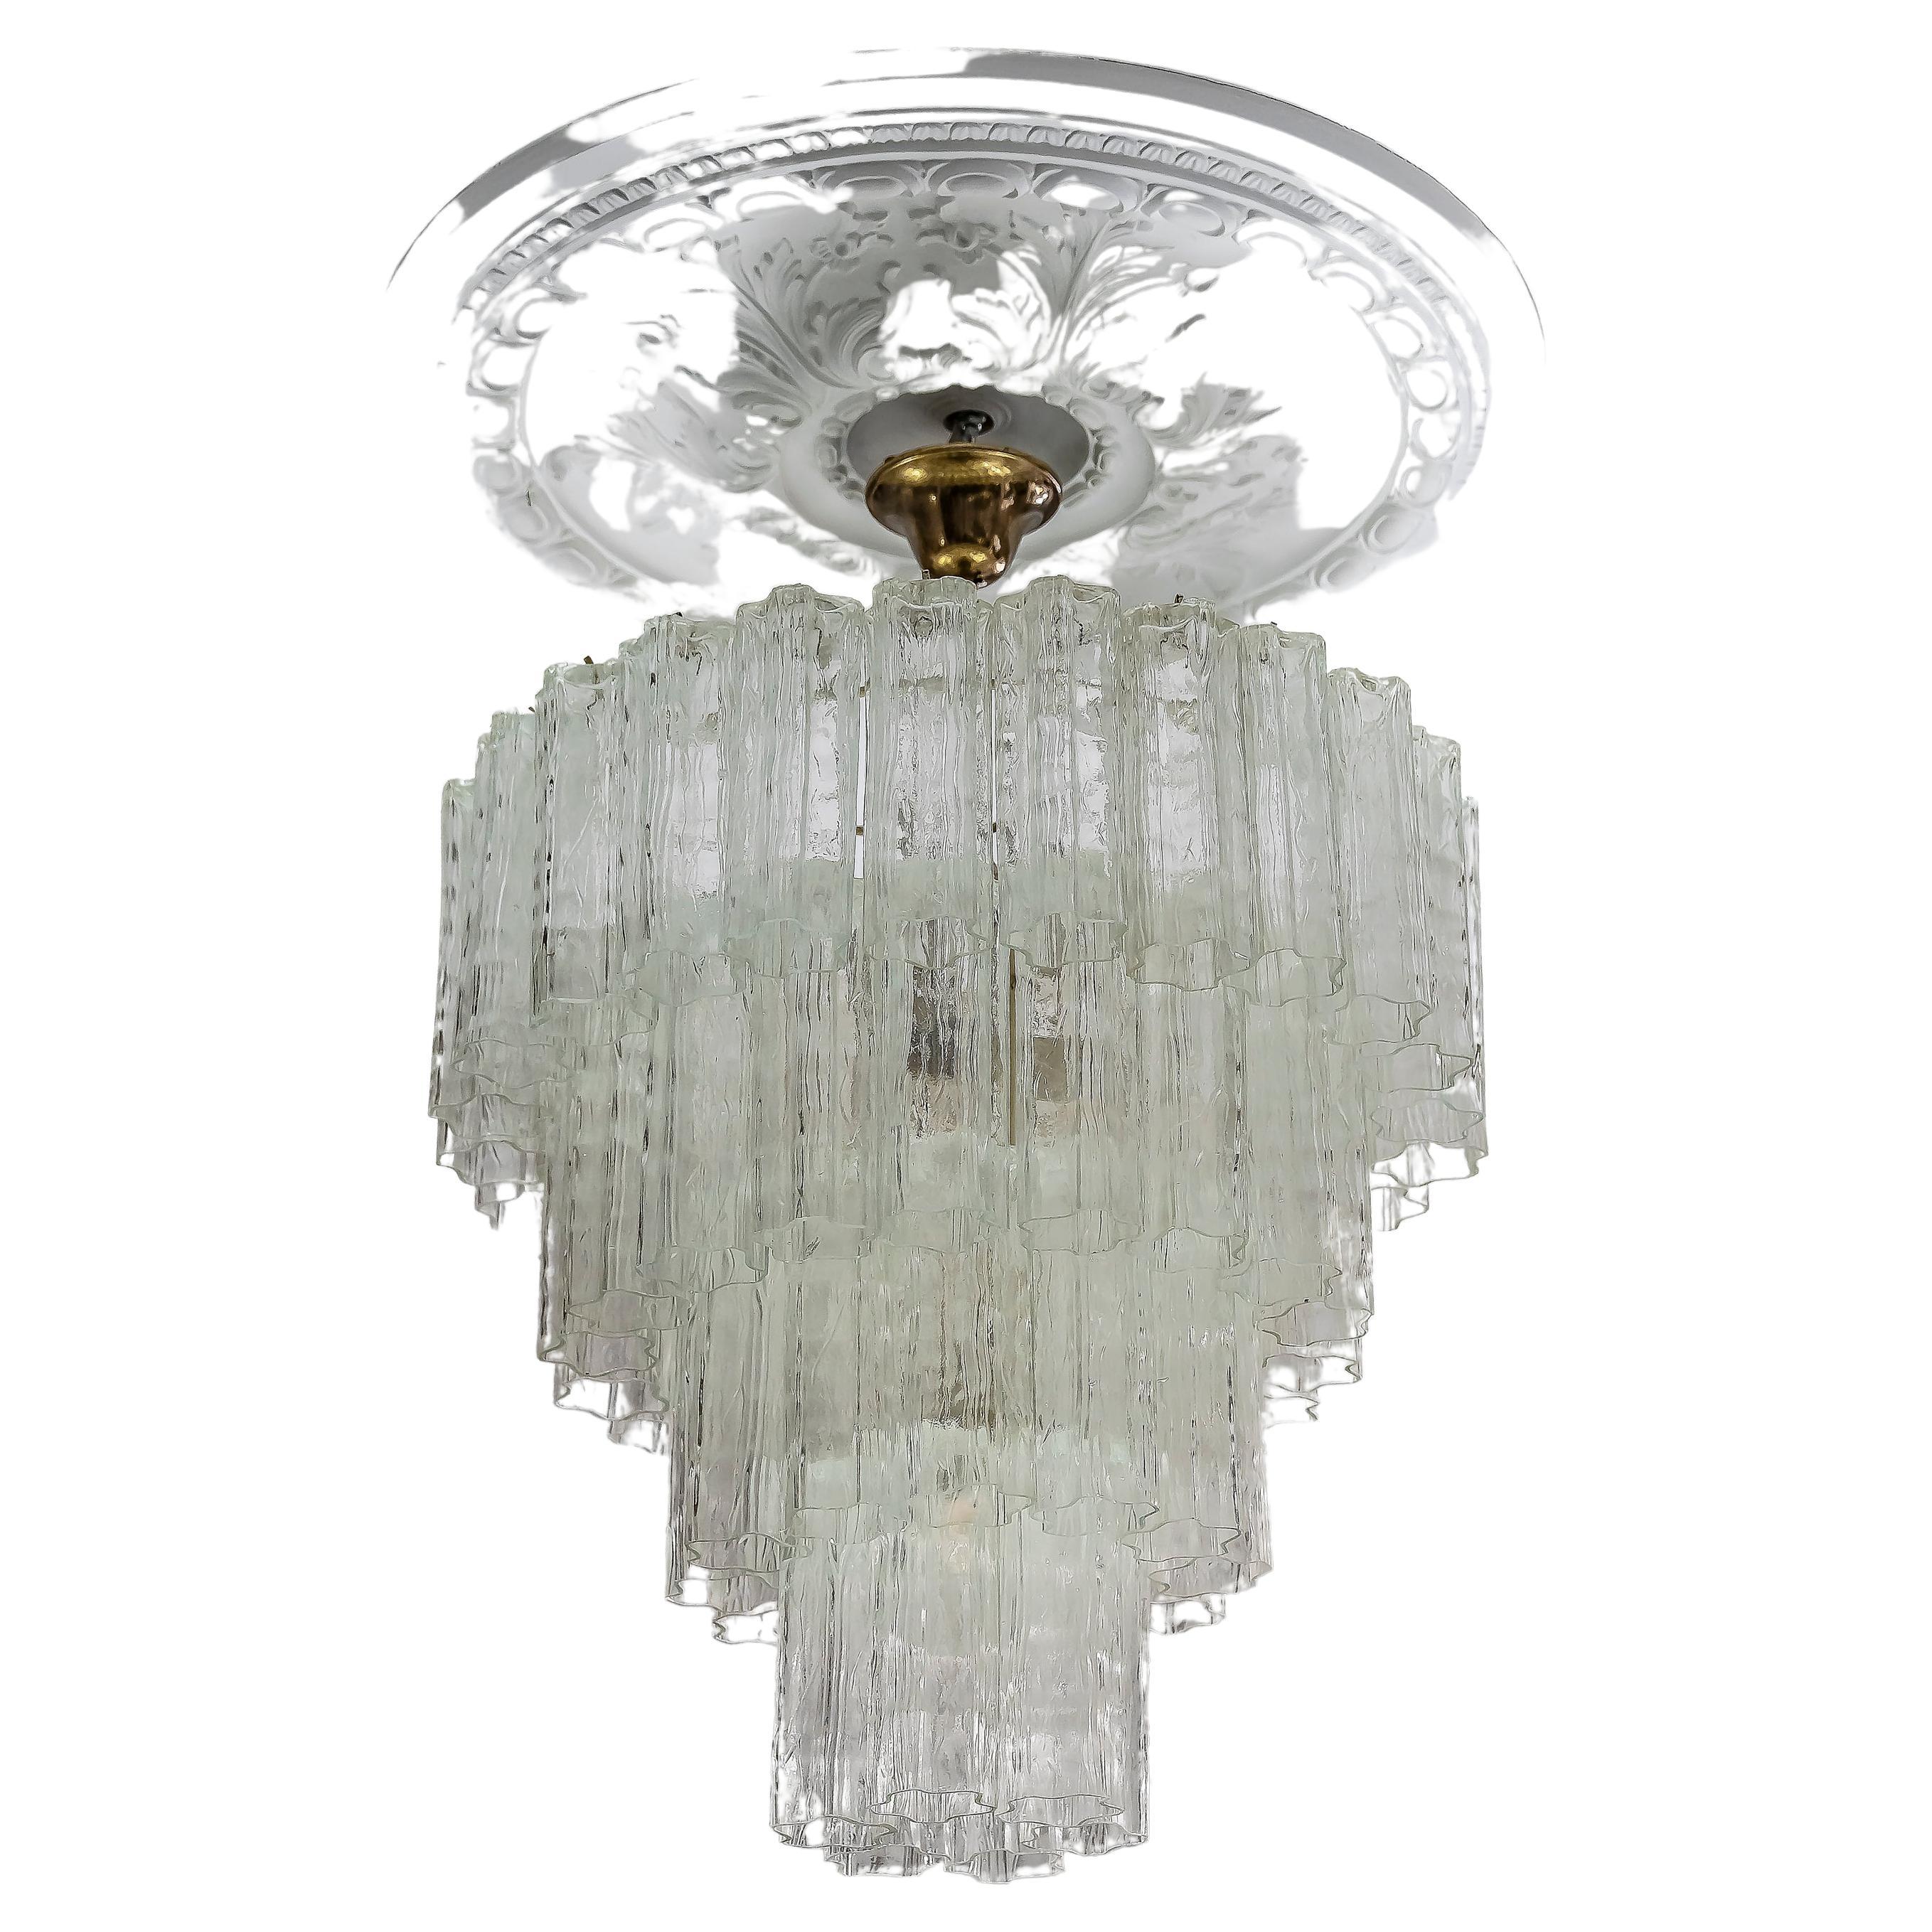 Italian handmade Murano glass chandelier.
The design of this chandelier is made metal base with opaline color Tubi Tronchi glass elements. 
Its is in a very good original vintage condition.
Bulbs 7 pcs. E27.


